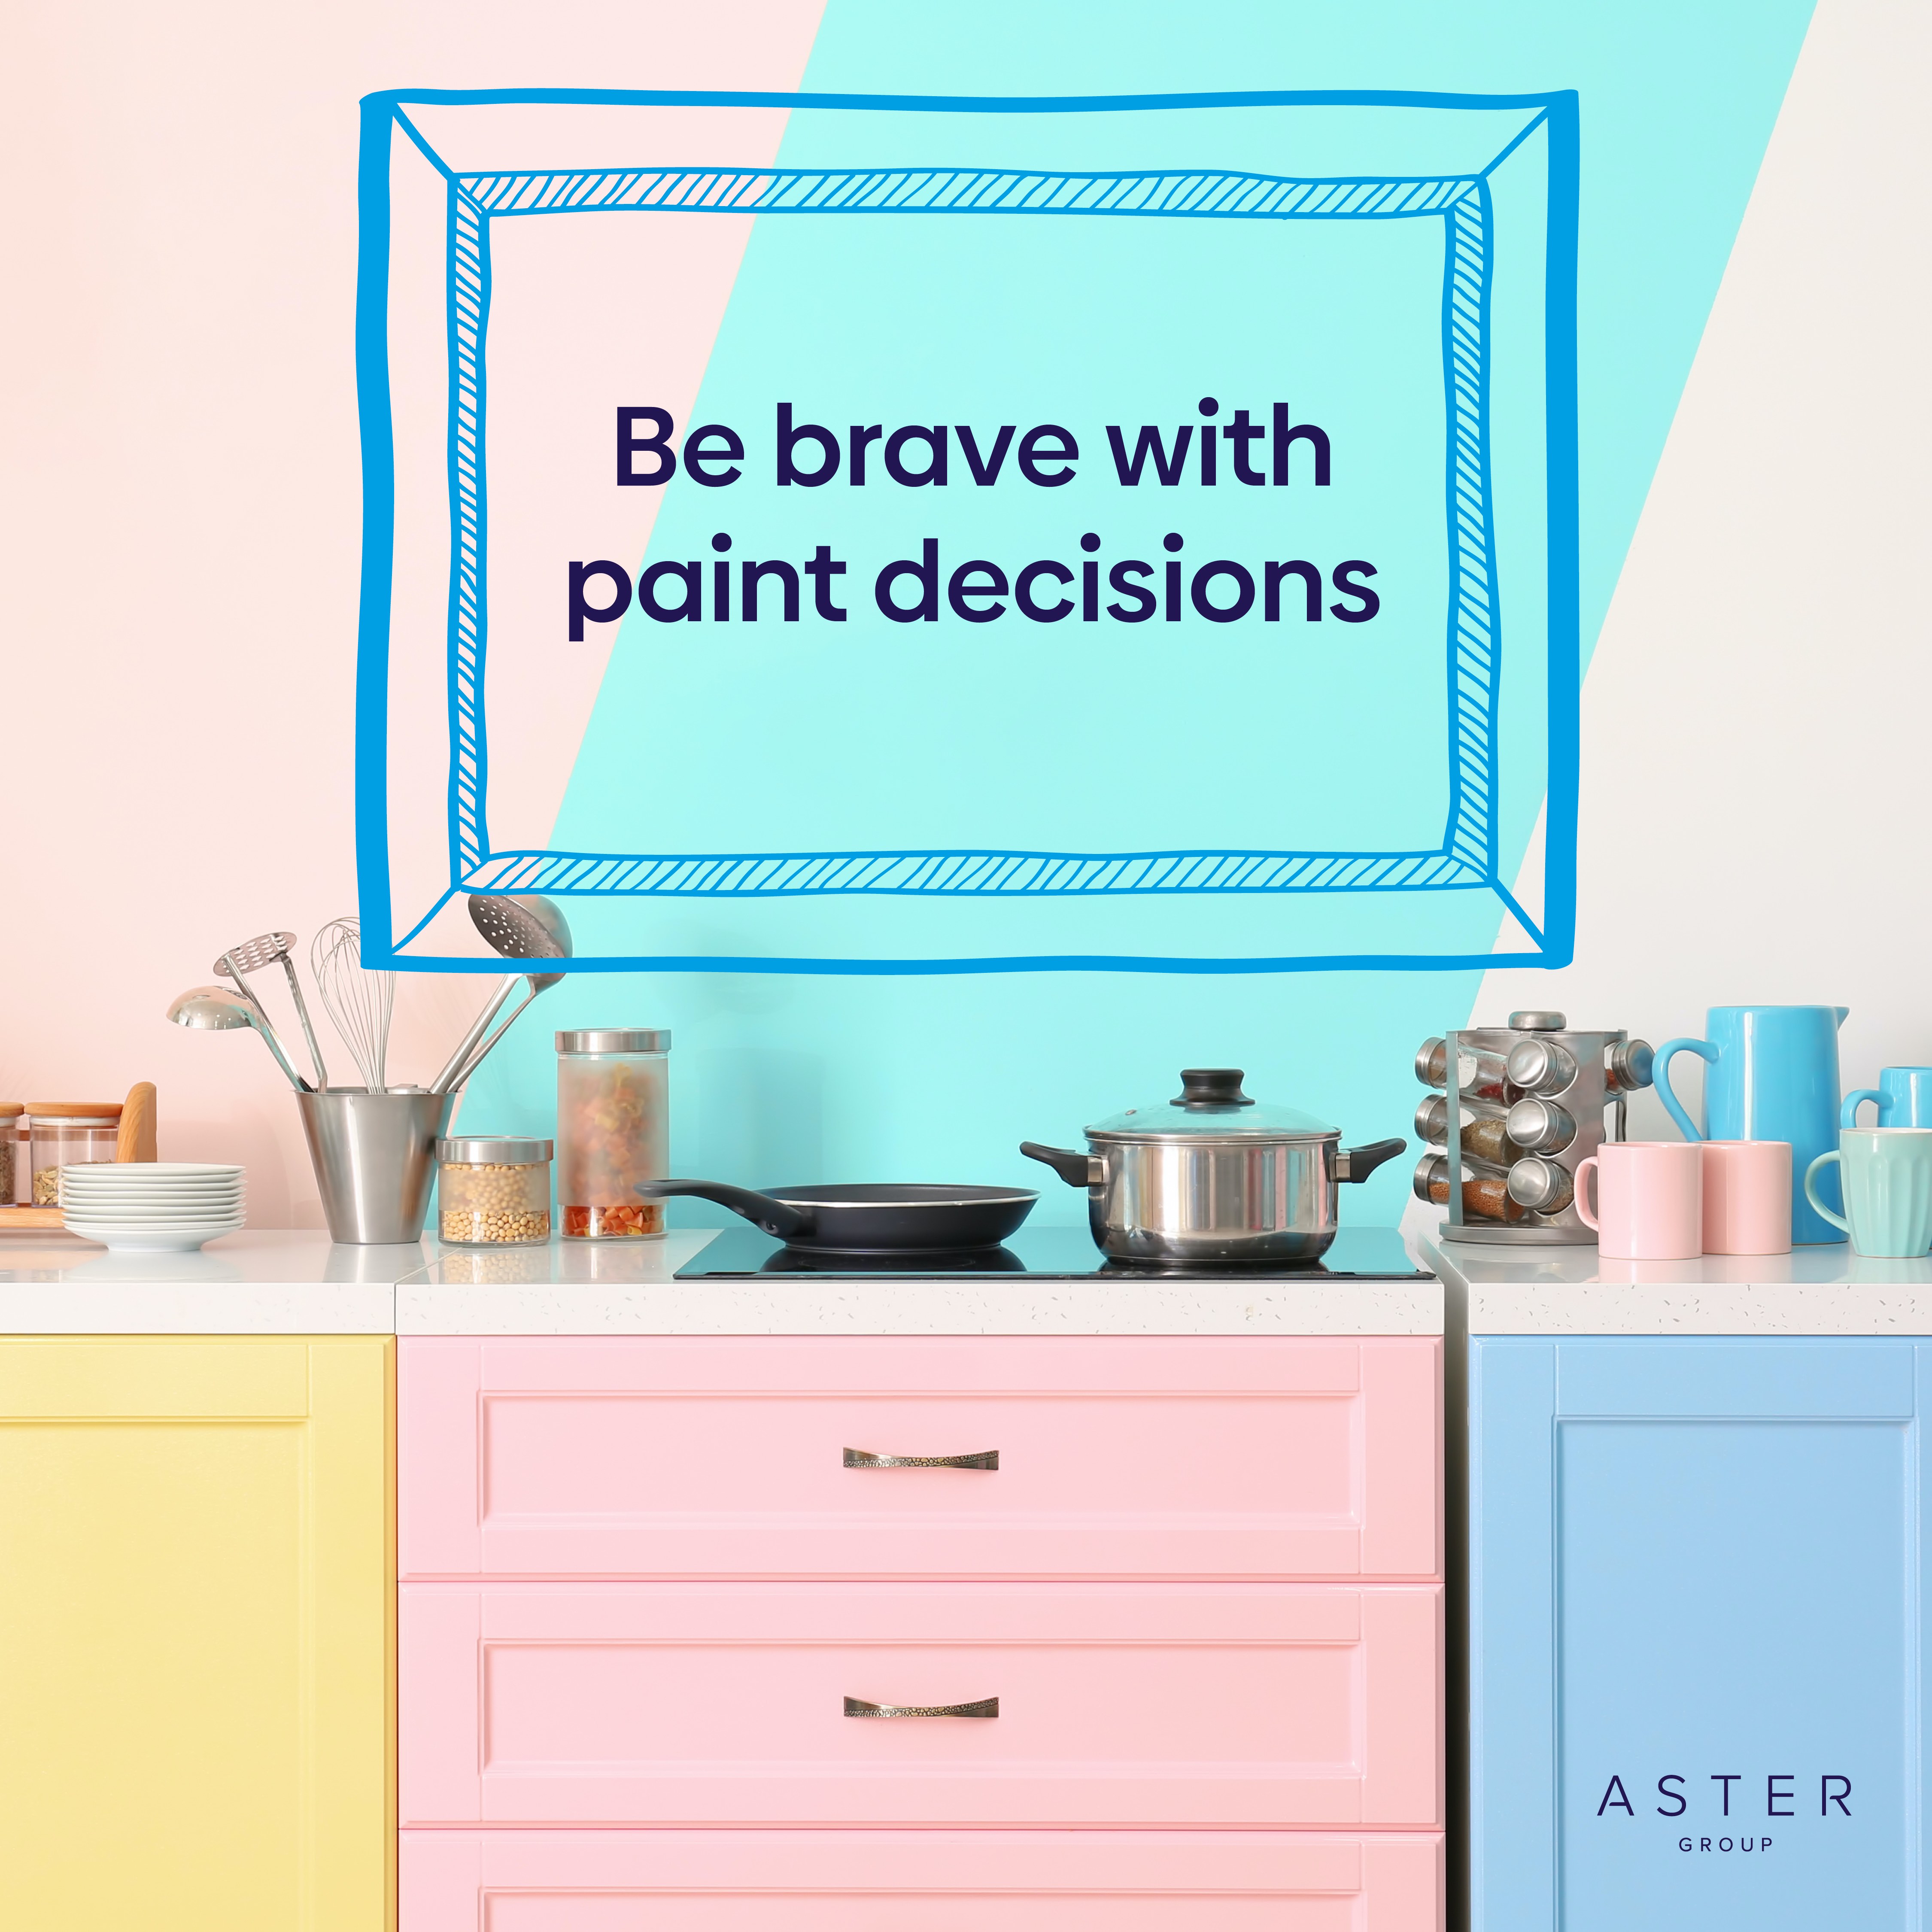 Be brave with paint decisions!